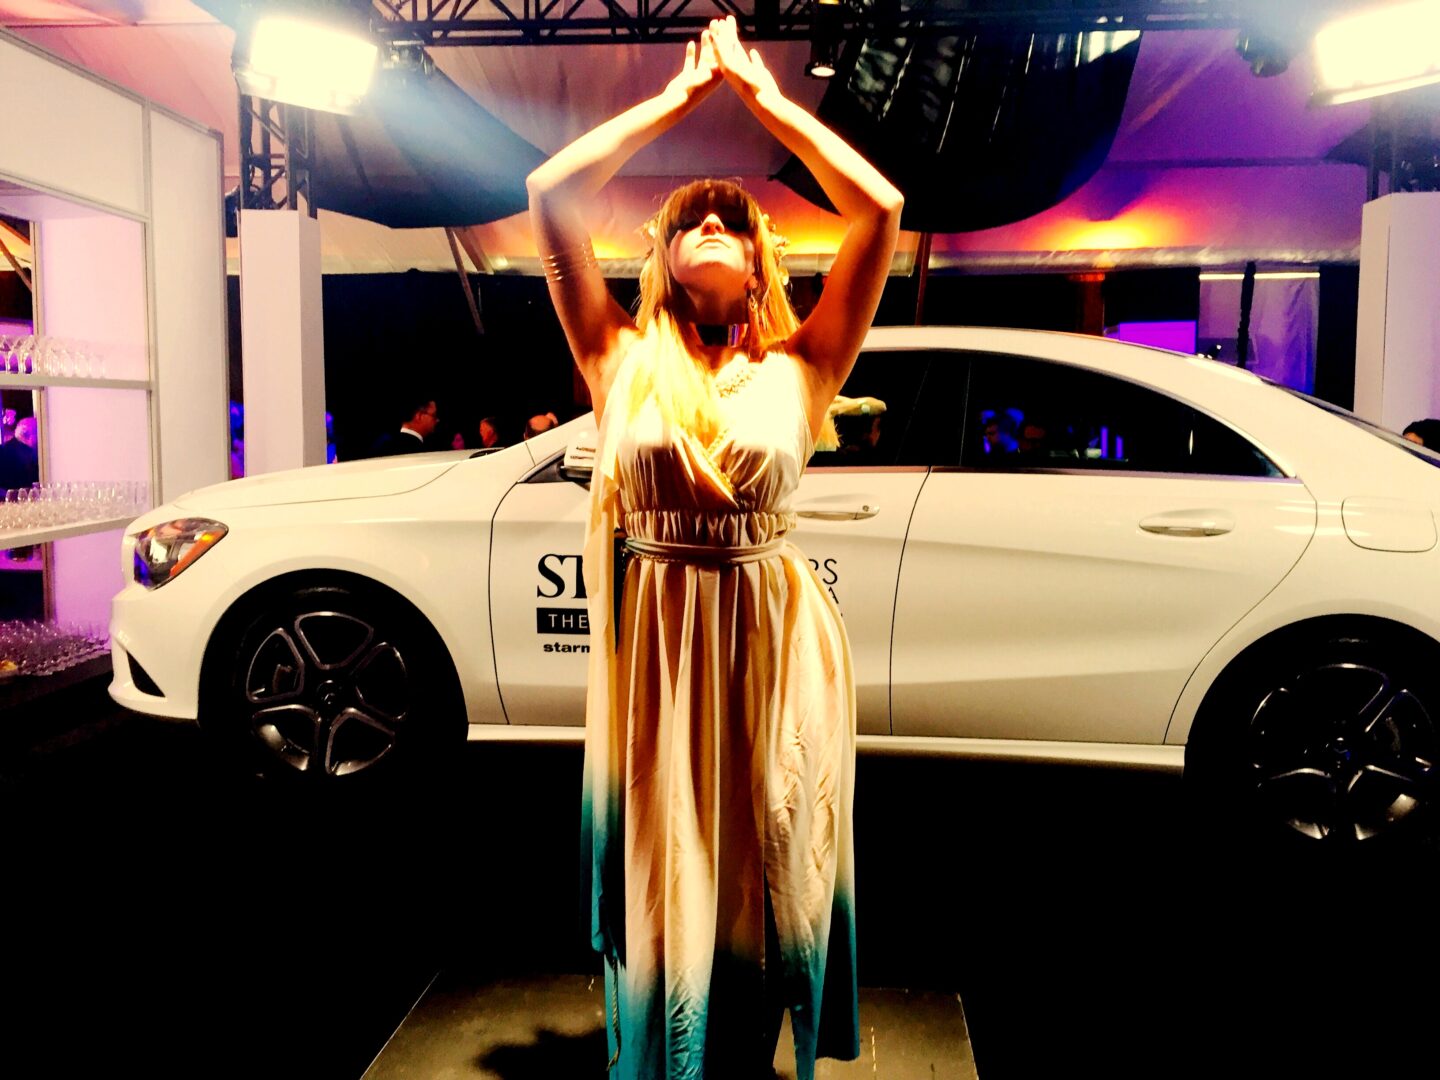 A woman in a long dress standing in front of a white car.